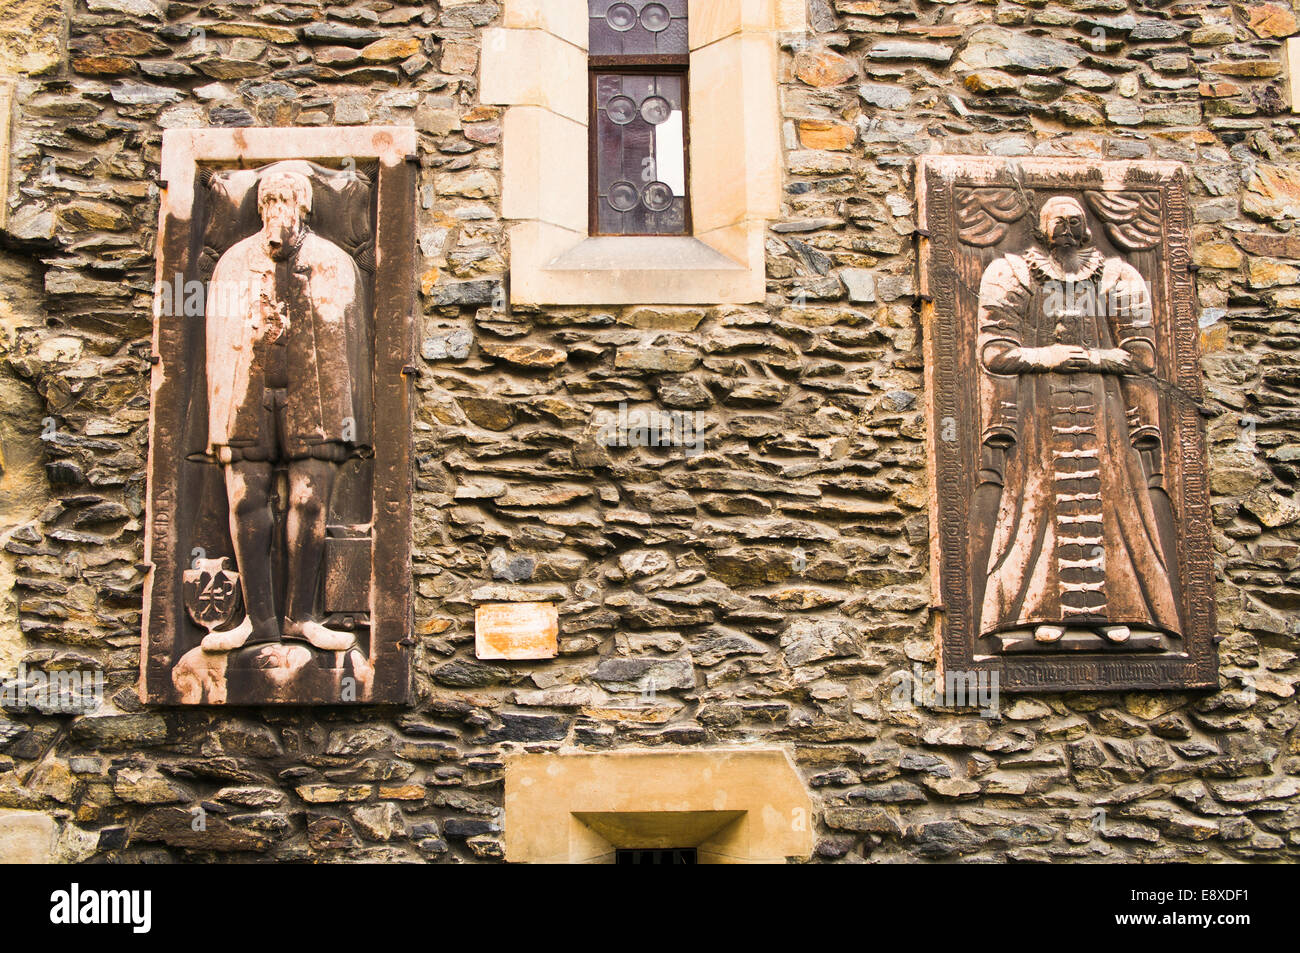 Renaissance tombstones collection at the walls of the Church of St Stephen from the 13th century, a prominent example of early Gothic architecture, in Kourim, a small town in the Central Bohemian Region, Czech Republic, on October 11, 2014. (CTK Photo/Lib Stock Photo